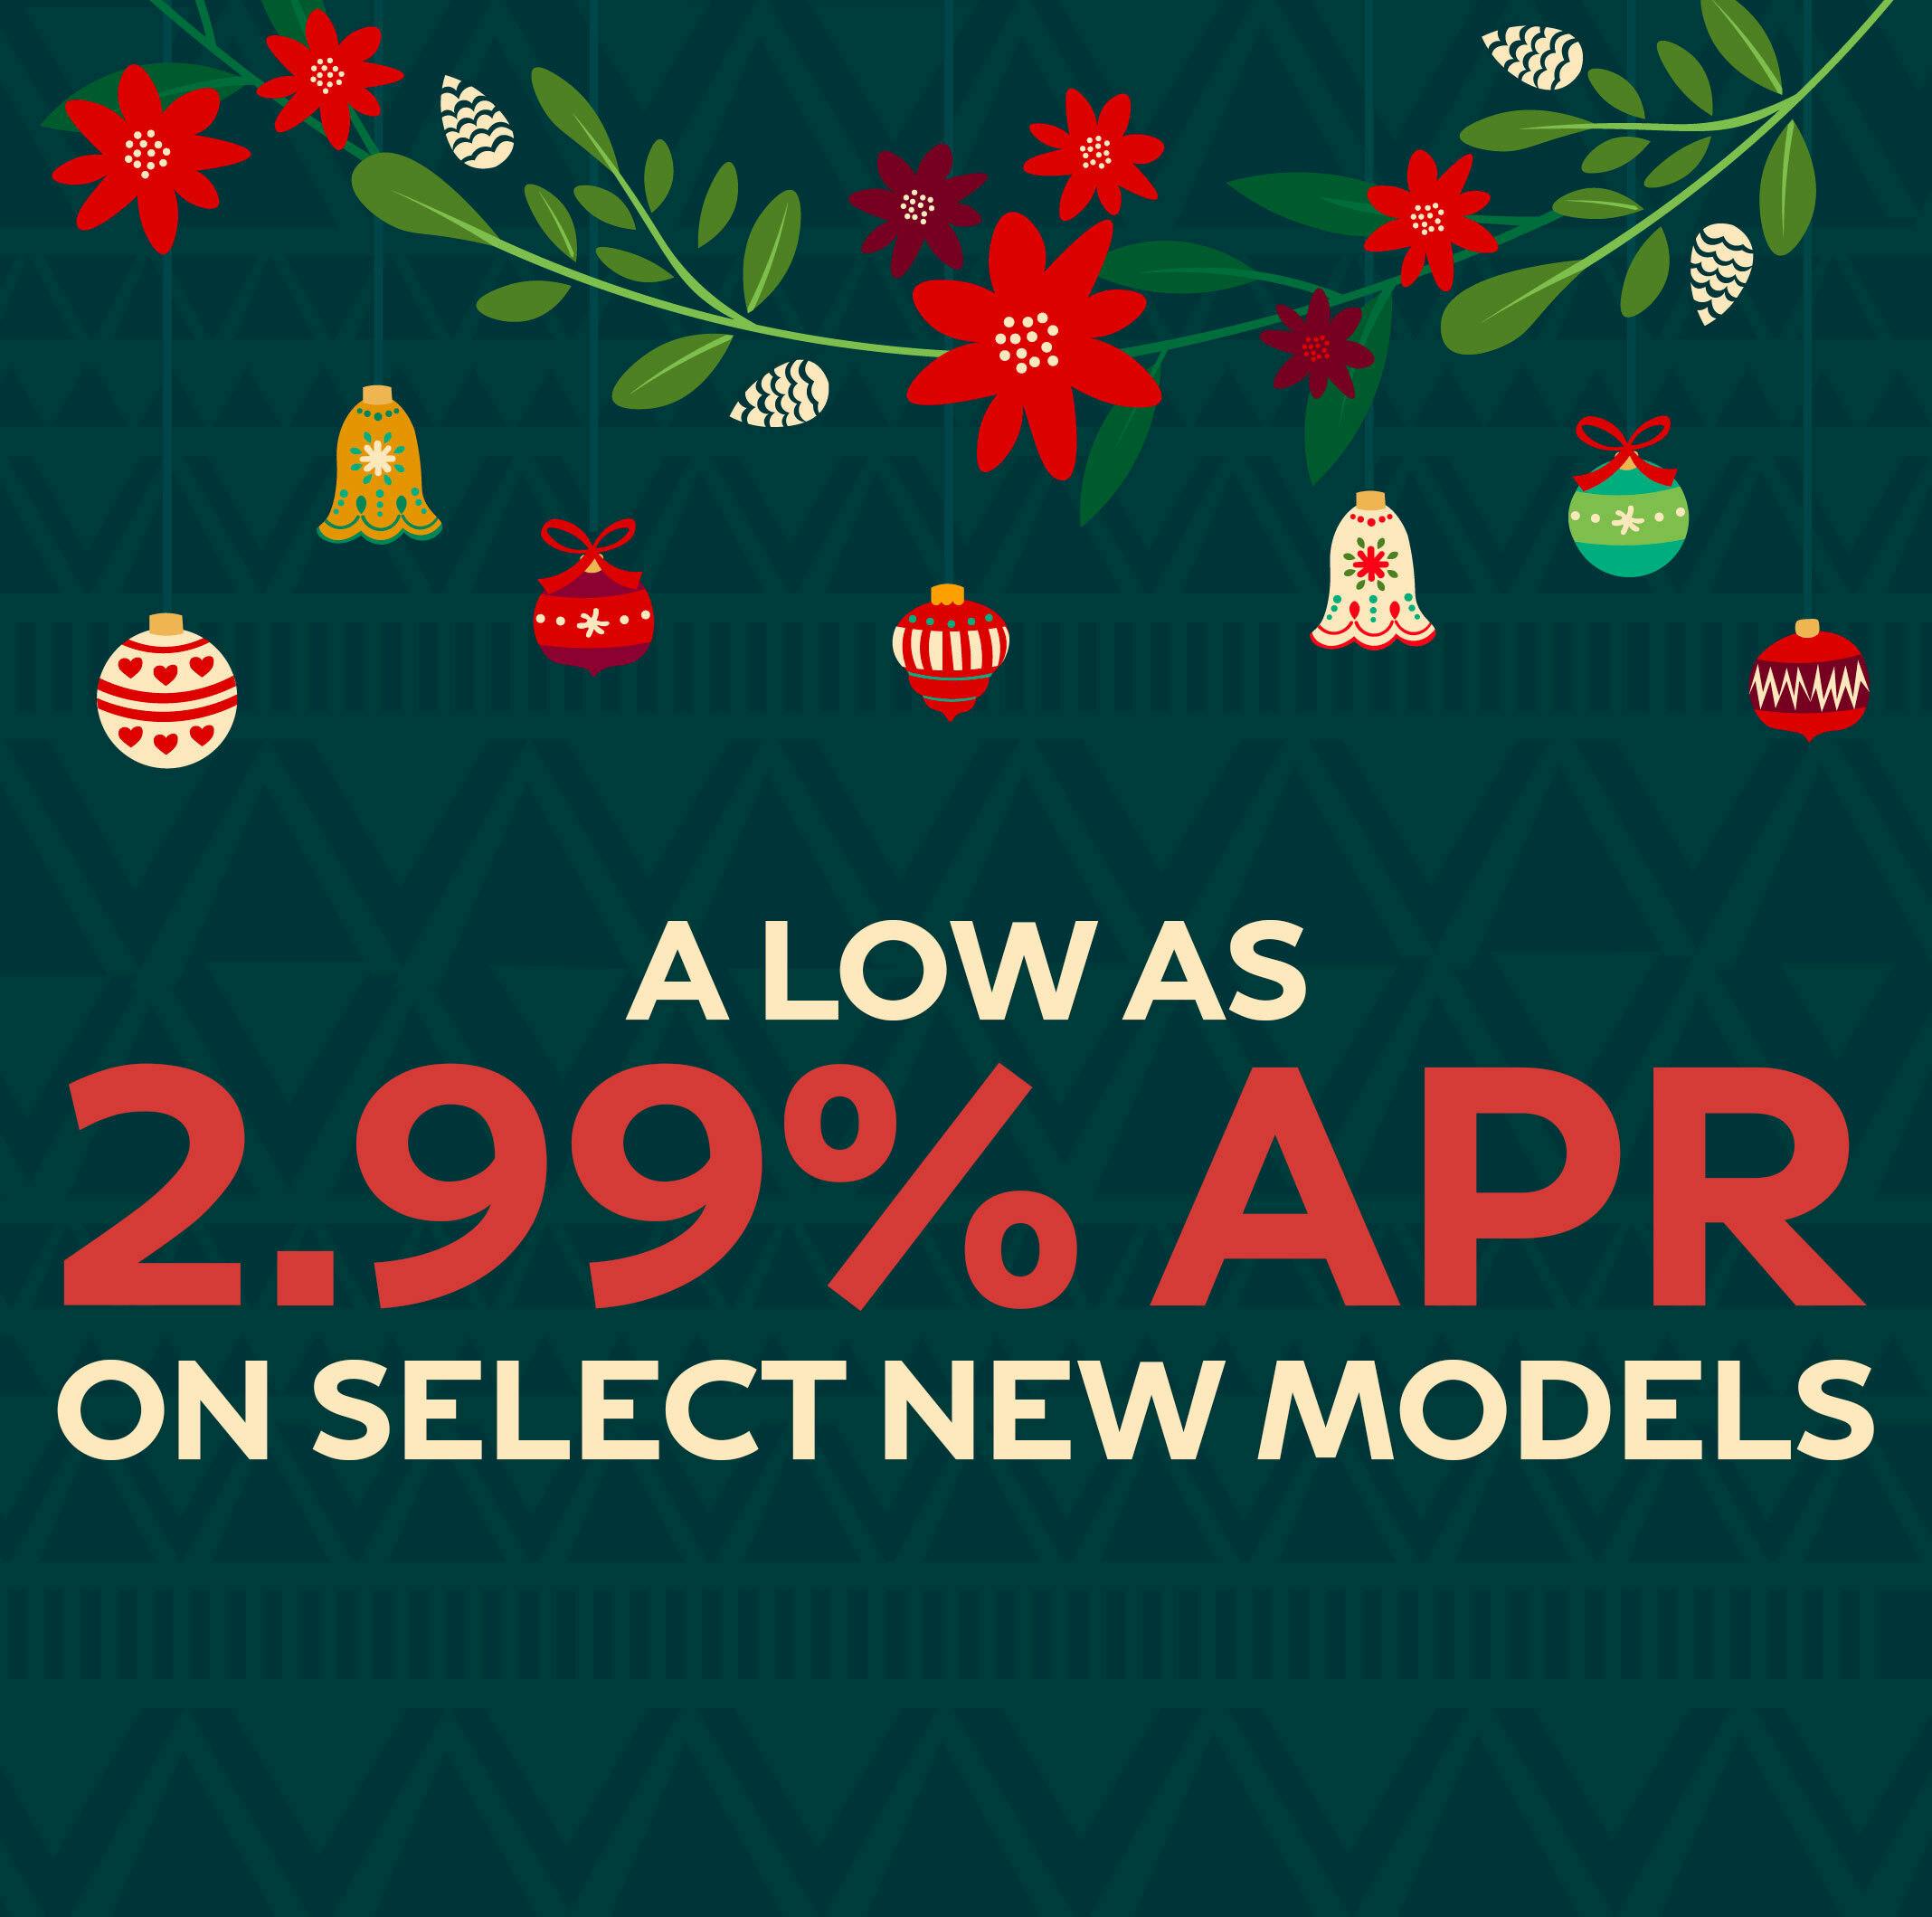 Low APR on Select New Models